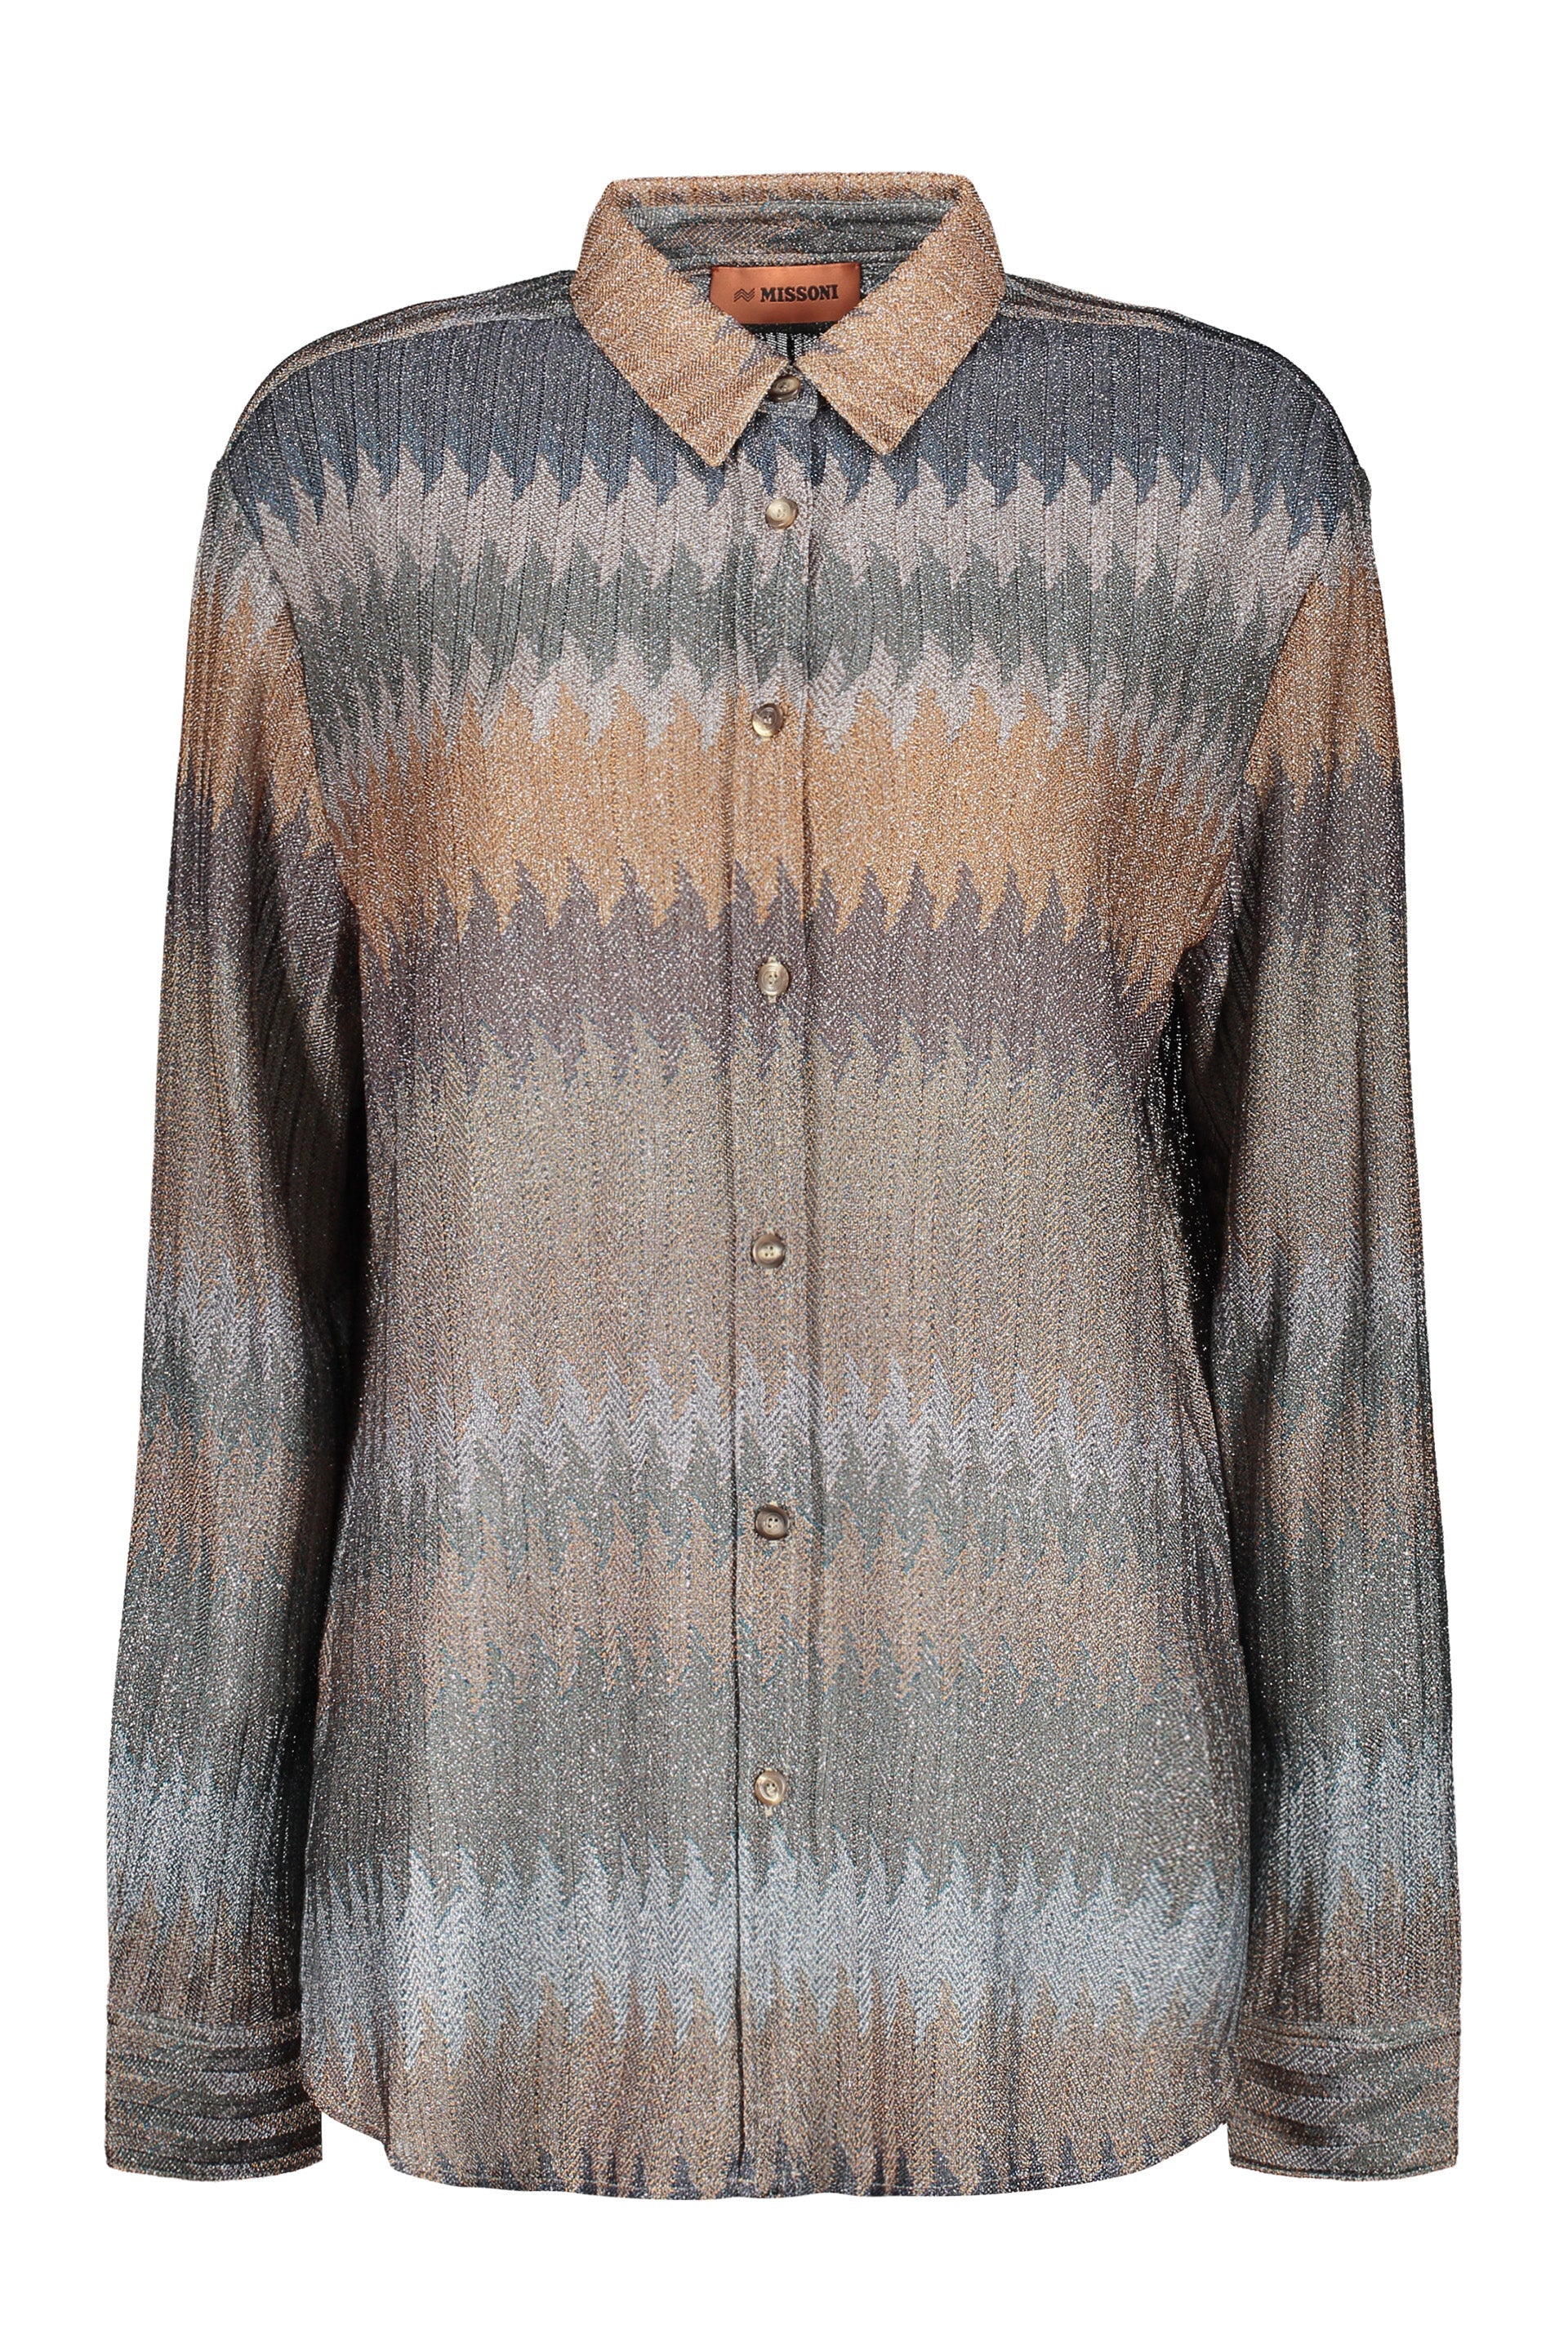 Missoni-OUTLET-SALE-Viscose-knit-shirt-Shirts-38-ARCHIVE-COLLECTION.jpg